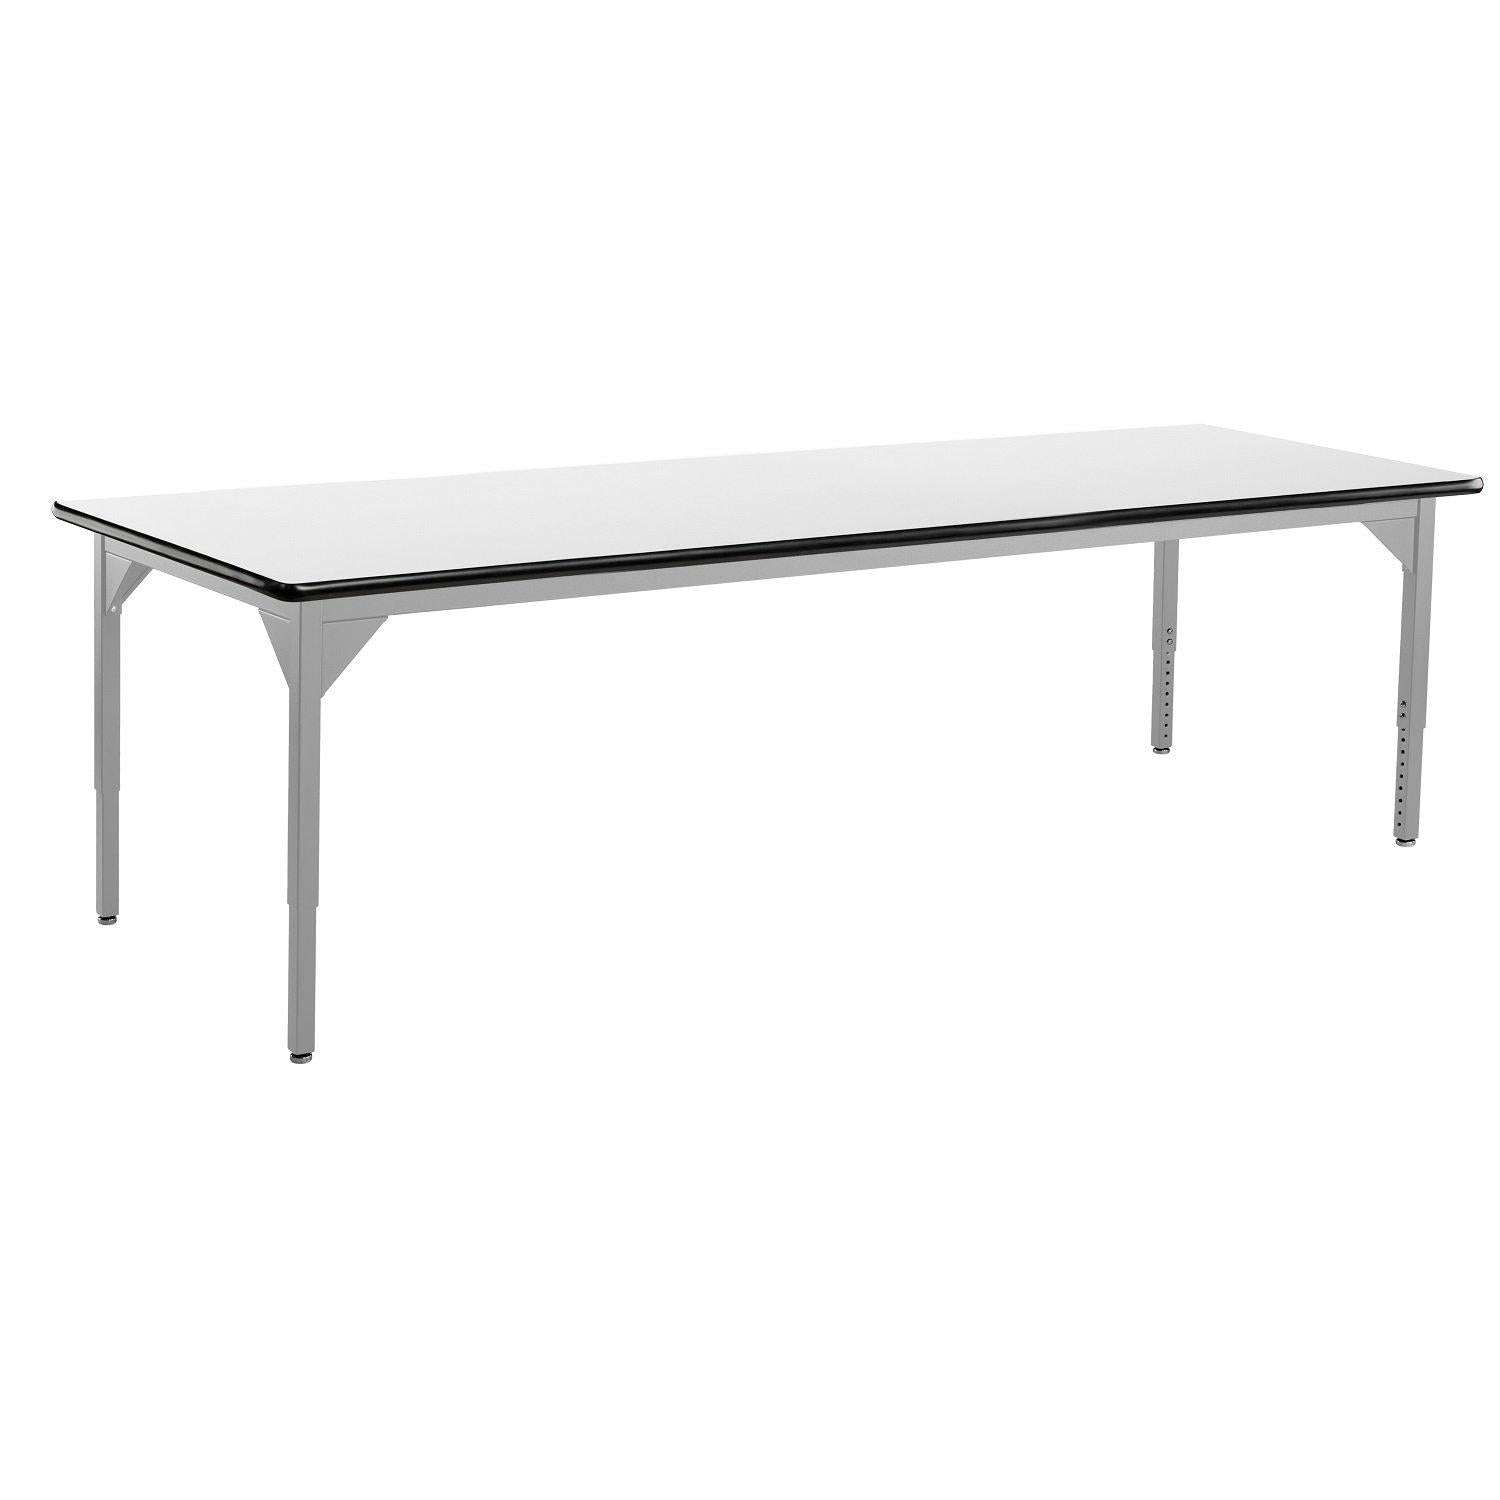 Heavy-Duty Height-Adjustable Utility Table, Soft Grey Frame, 36" x 72", Whiteboard High-Pressure Laminate Top